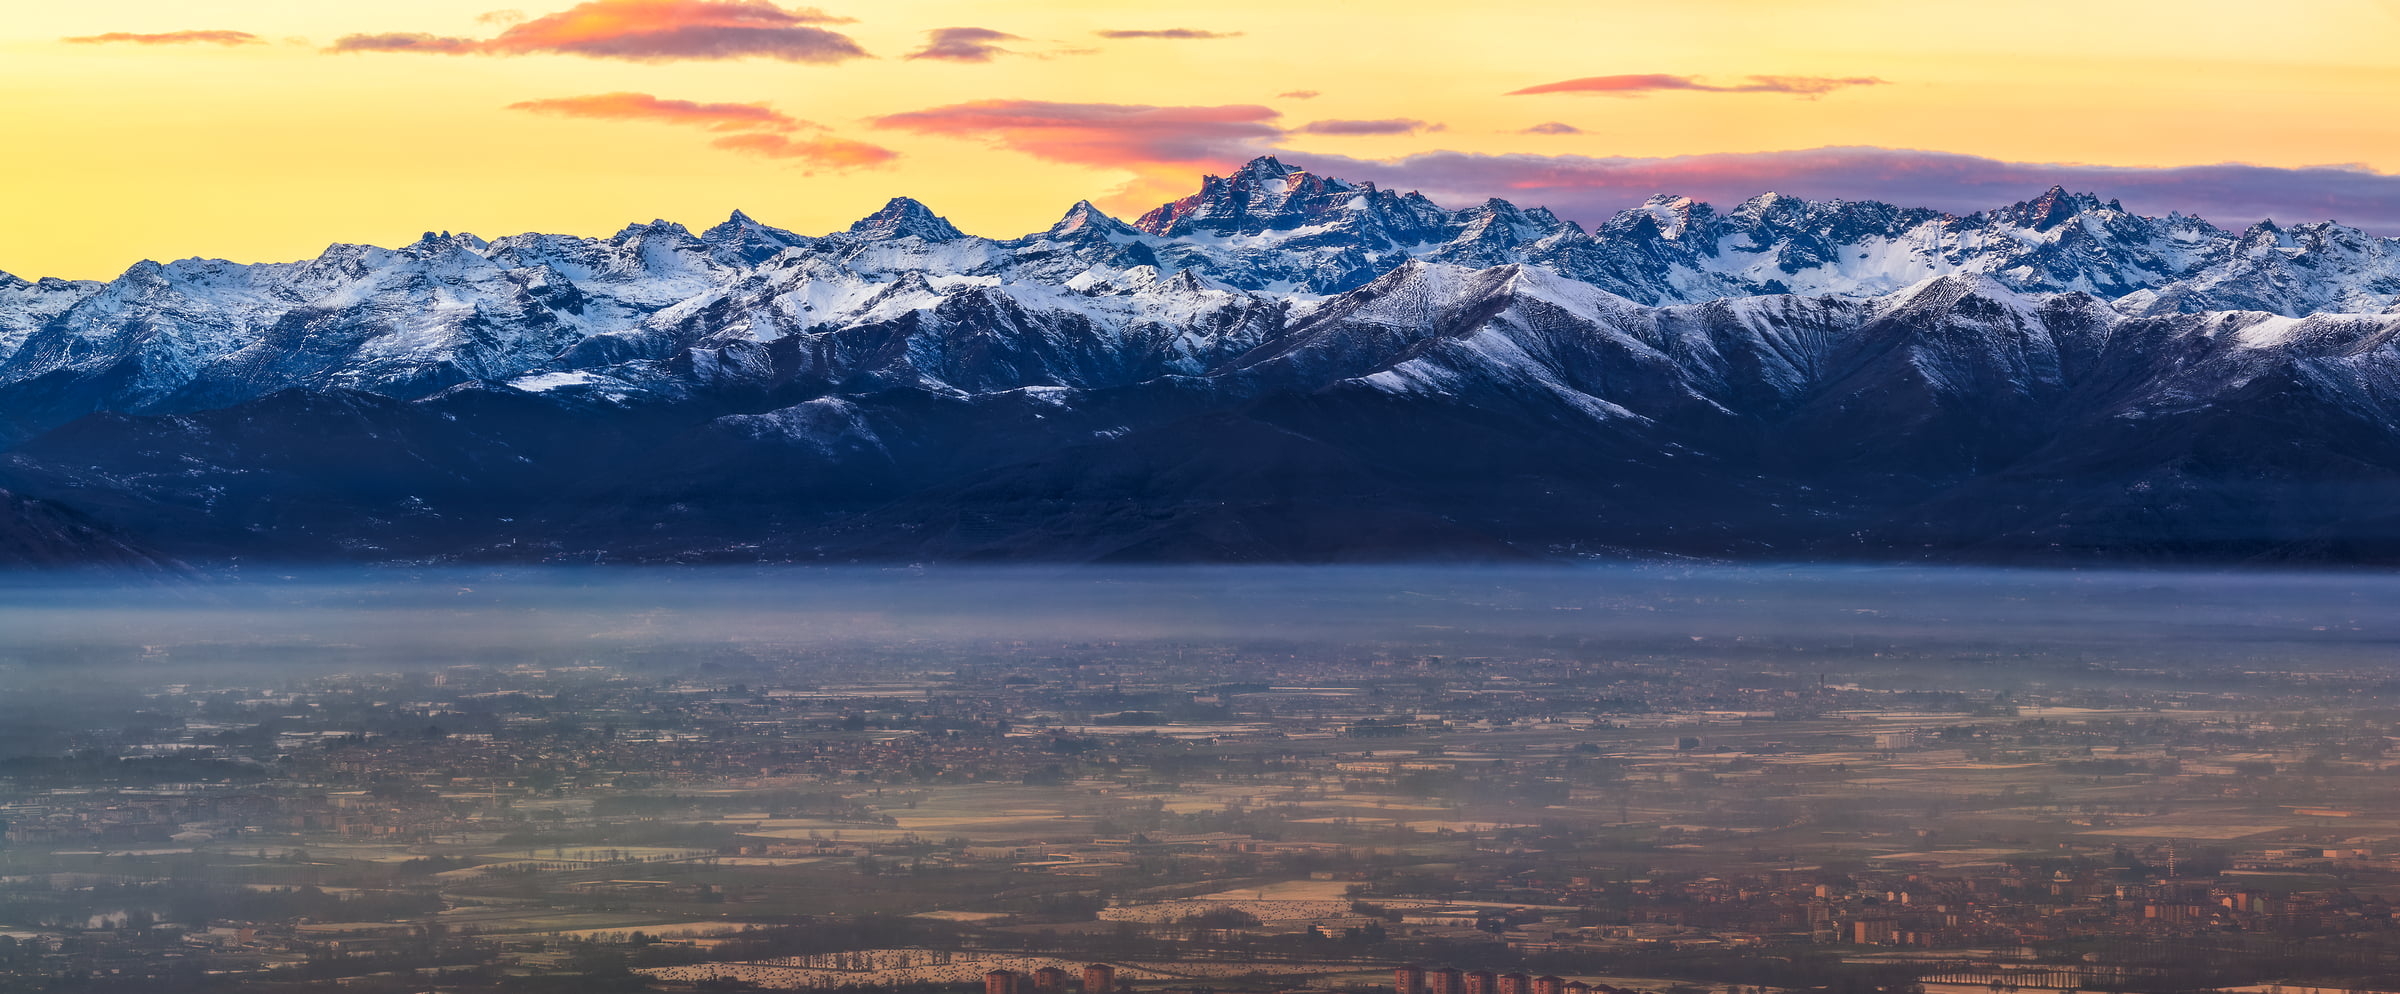 220 megapixels! A very high resolution, large-format VAST photo print of the alps at sunset; landscape photograph created by Duilio Fiorille in Turin Superga Hill, Piedmont, Italy